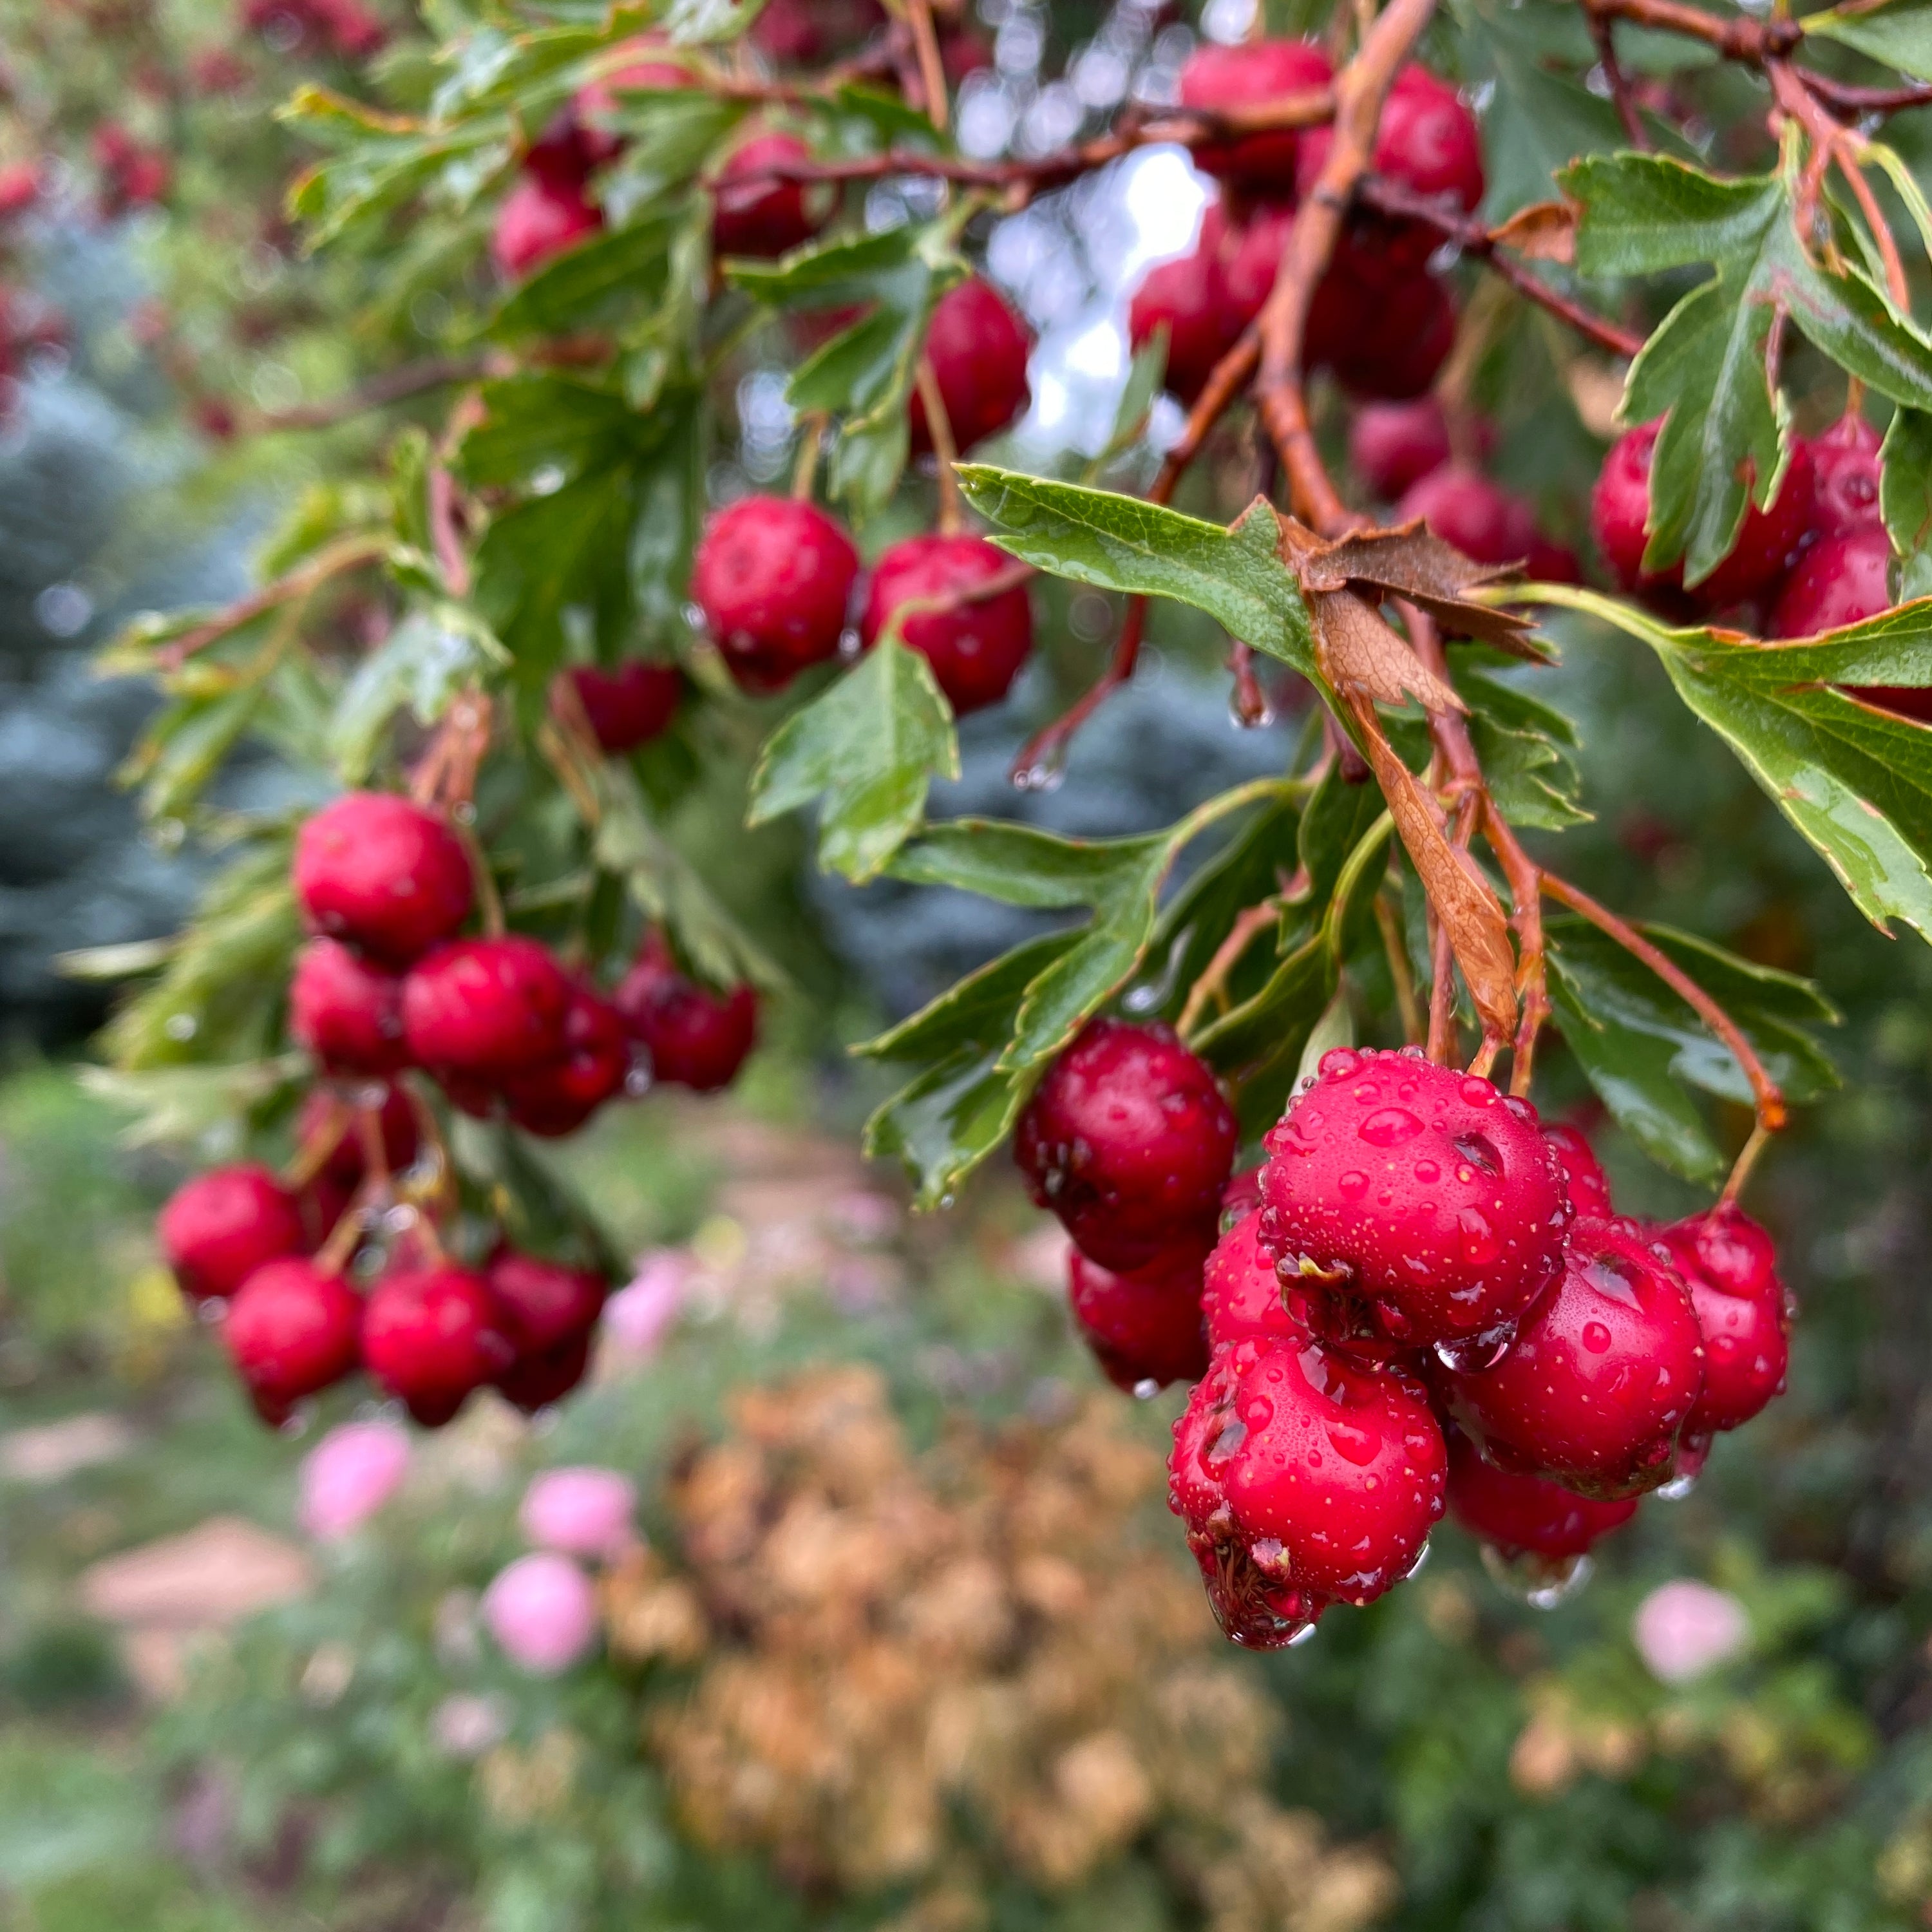 Close-up image of ripe Hawthorn berries sourced from Sacred Plant Co's Low Water Regenerative Colorado Farm, known for sustainable farming practices.